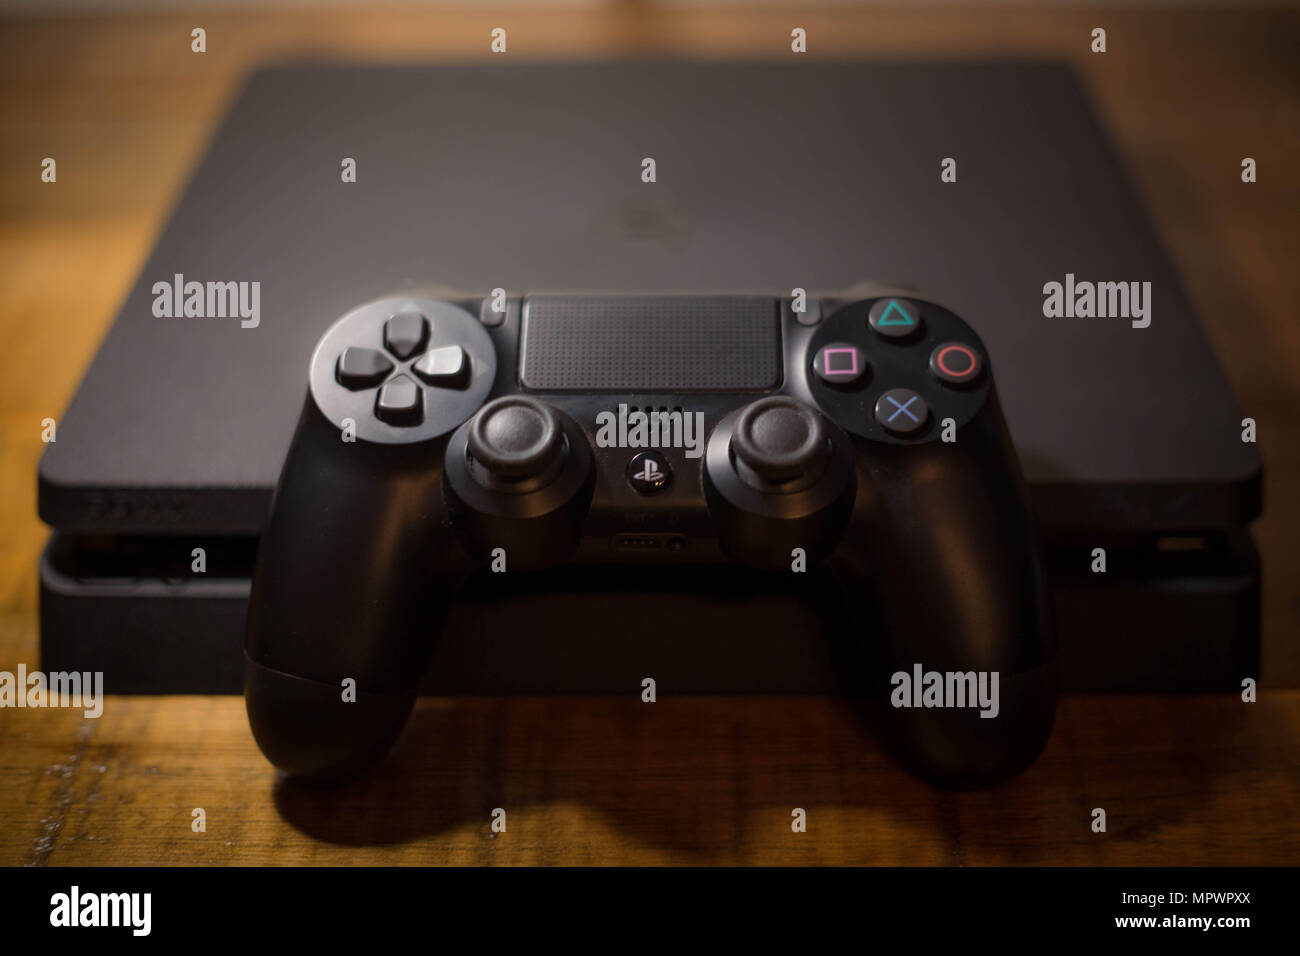 A Sony PlayStation 4 video game console with a black wireless controller next to it. The PlayStation 4 or PS4 is knows as the eighth generation of home video game console developed by the Japanese company Sony Interactive Entertainment. The console sold for about 74 million units since it was released in November 2013. Stock Photo